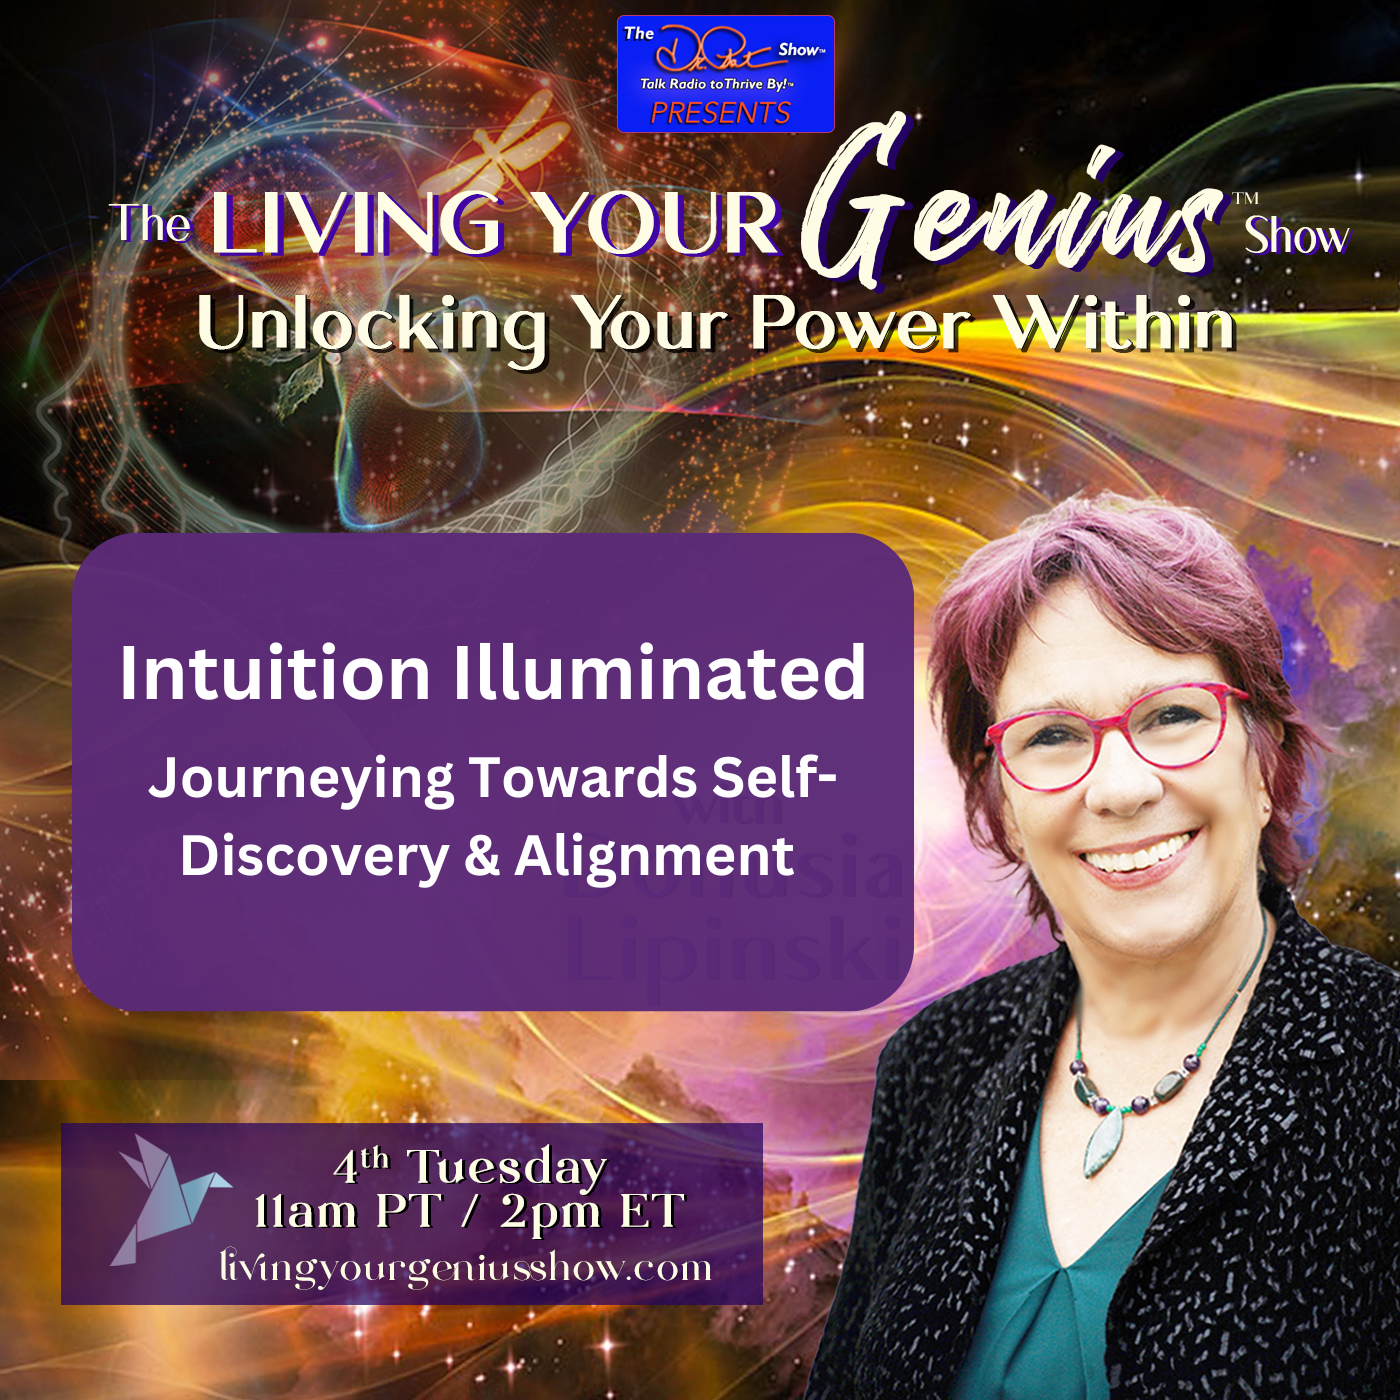 Intuition Illuminated: Journeying Towards Self-Discovery and Alignment